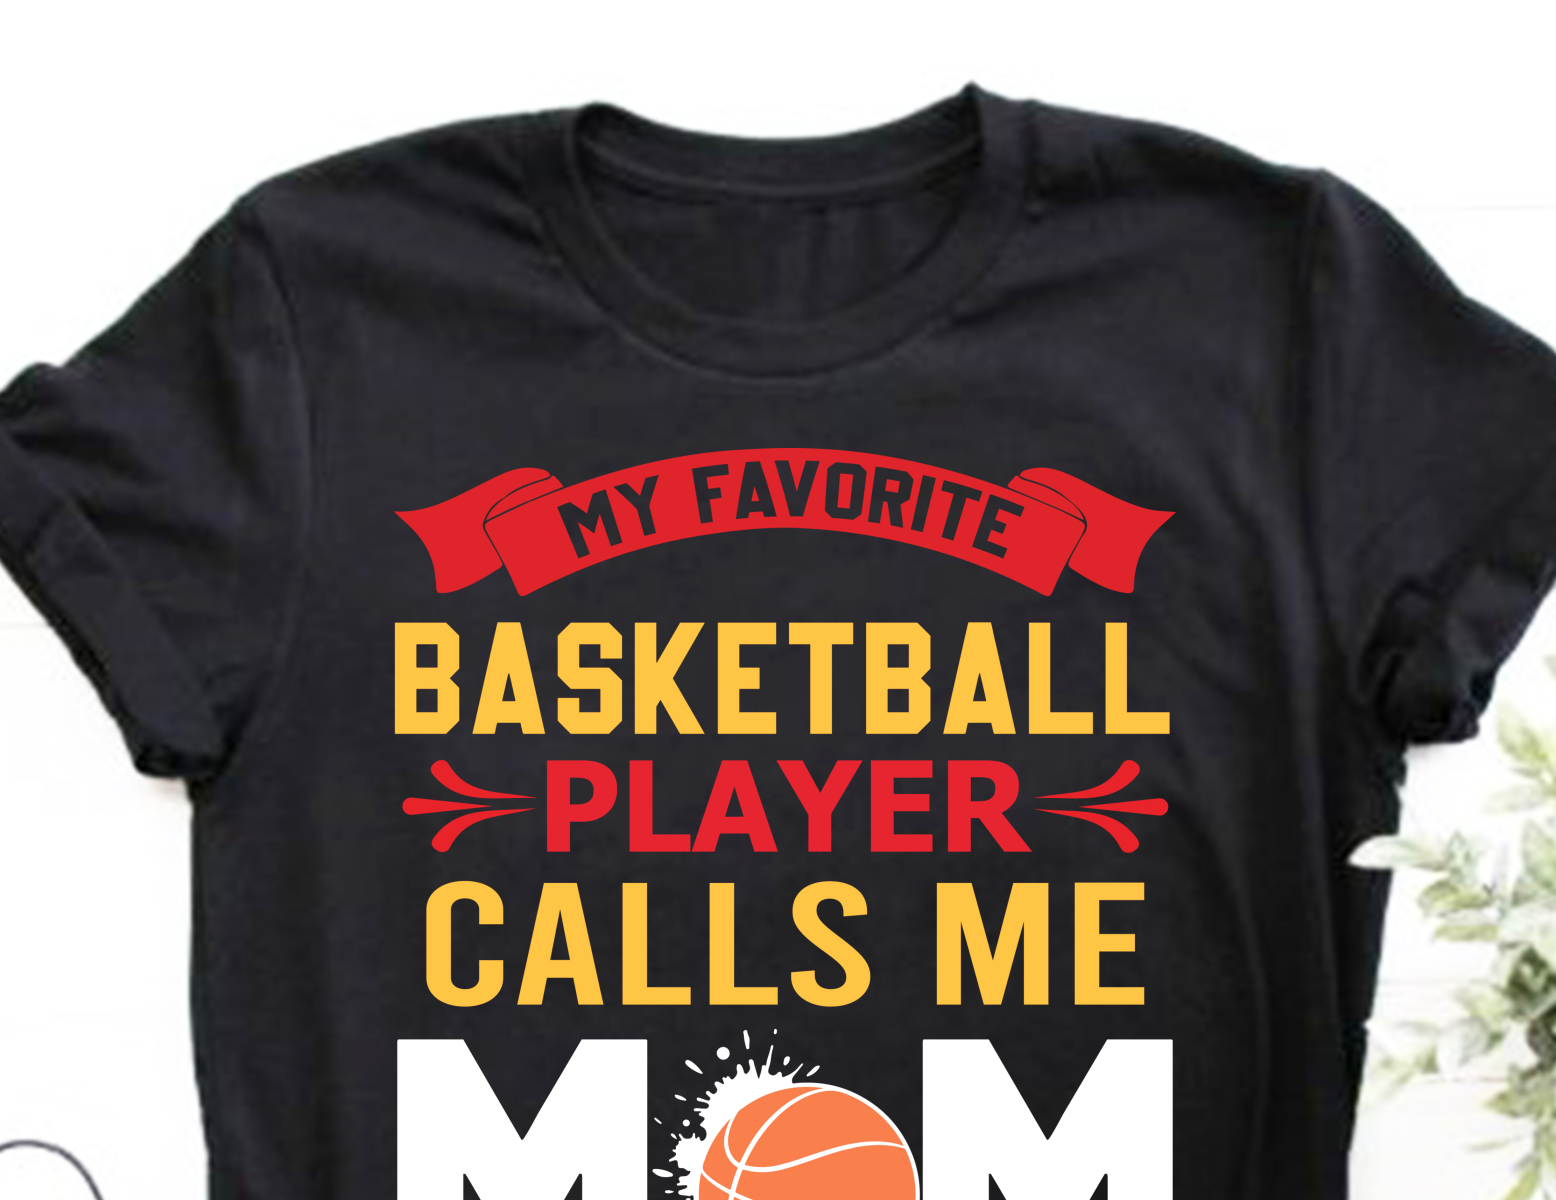 MY FAVORITE BASKETBALL PLAYER CALLS ME MOM by Mr Ithan on Dribbble